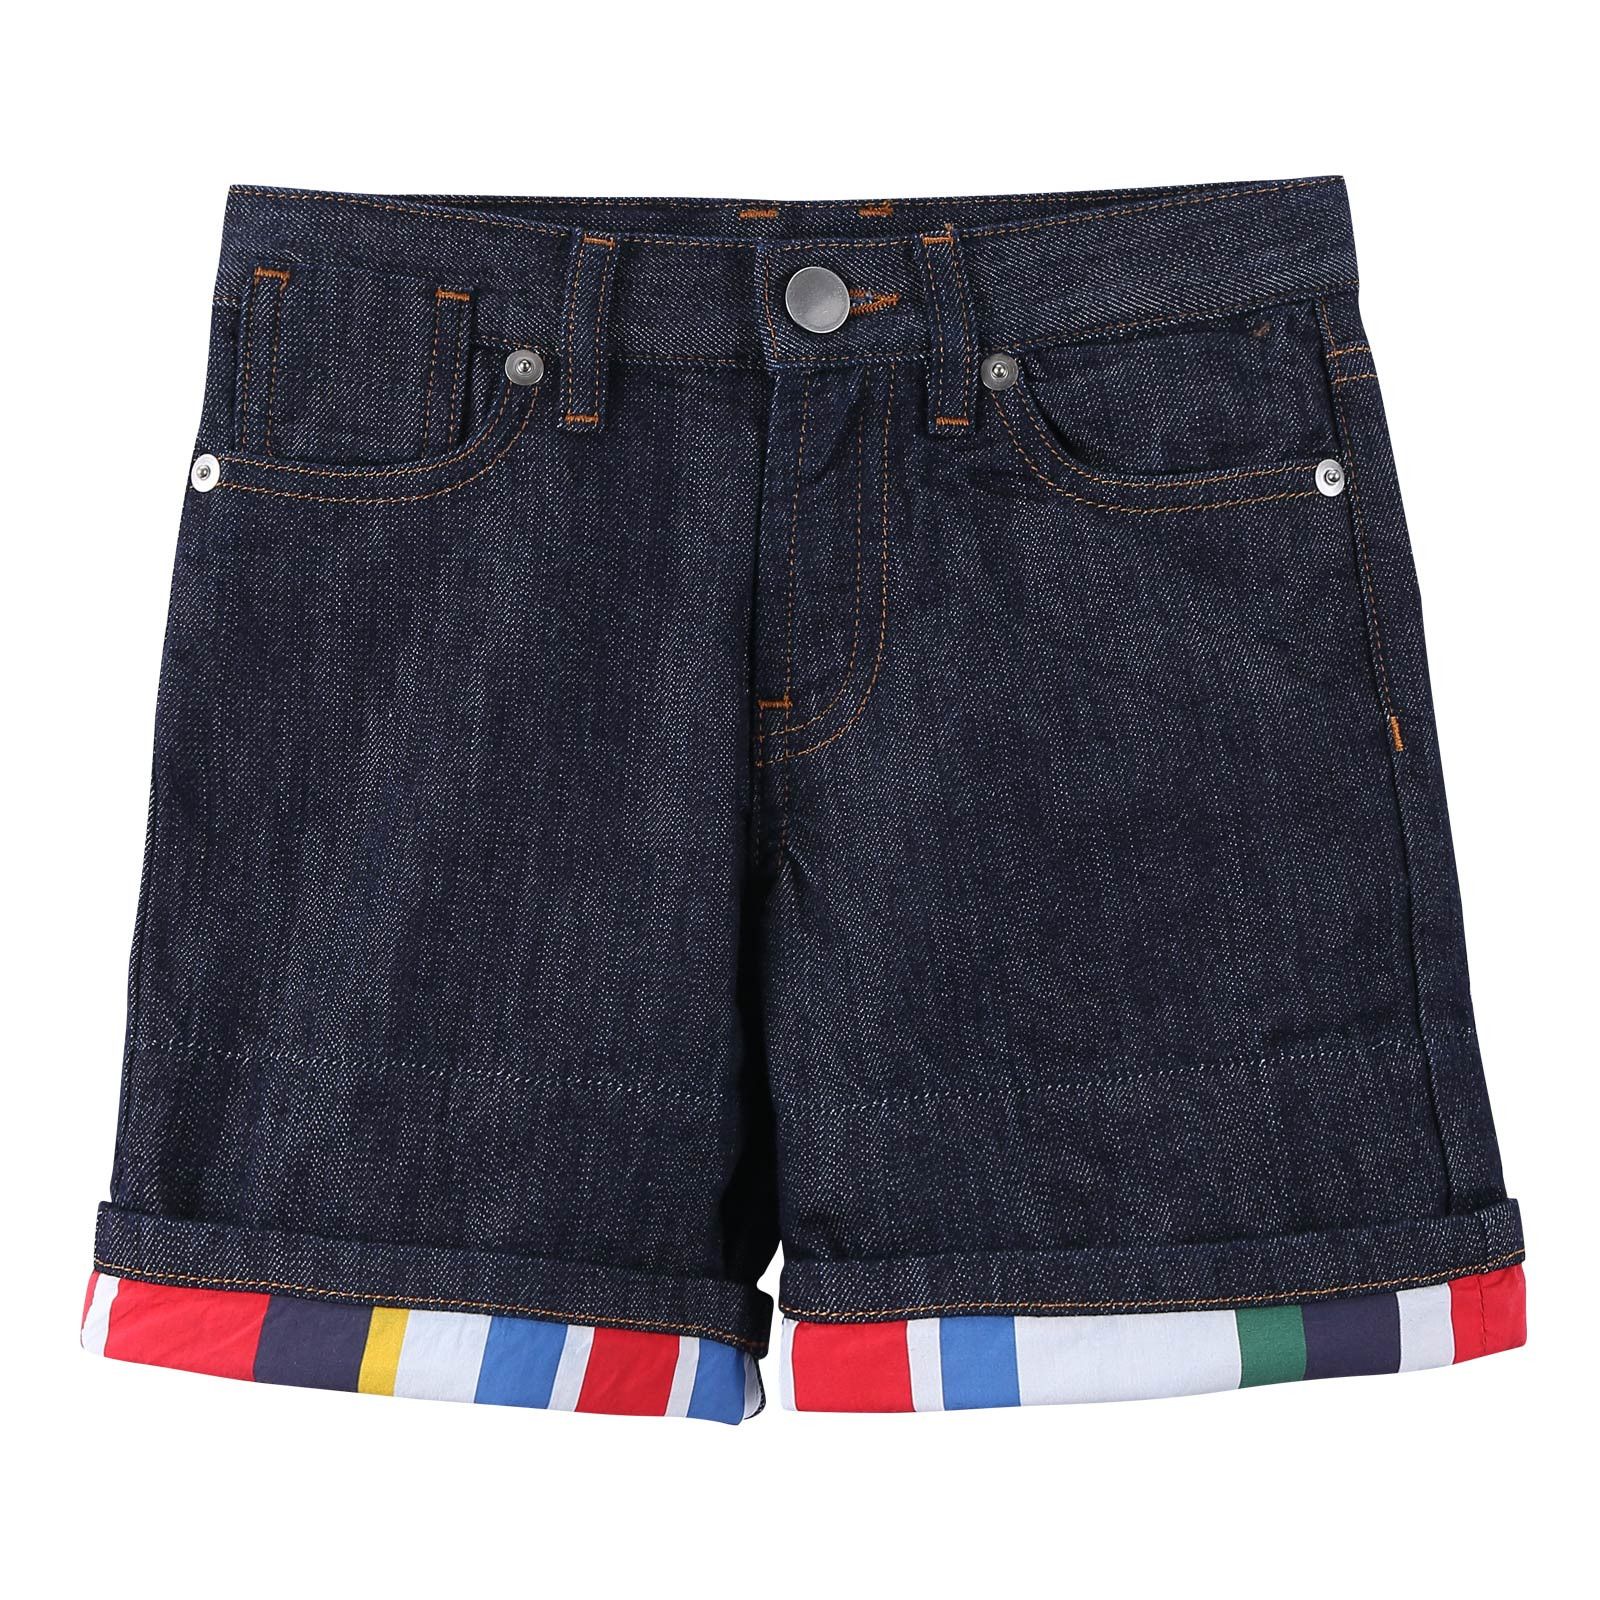 Girls Navy Blue Cotton Short With Multicolor Turn Up Cuffs - CÉMAROSE | Children's Fashion Store - 1